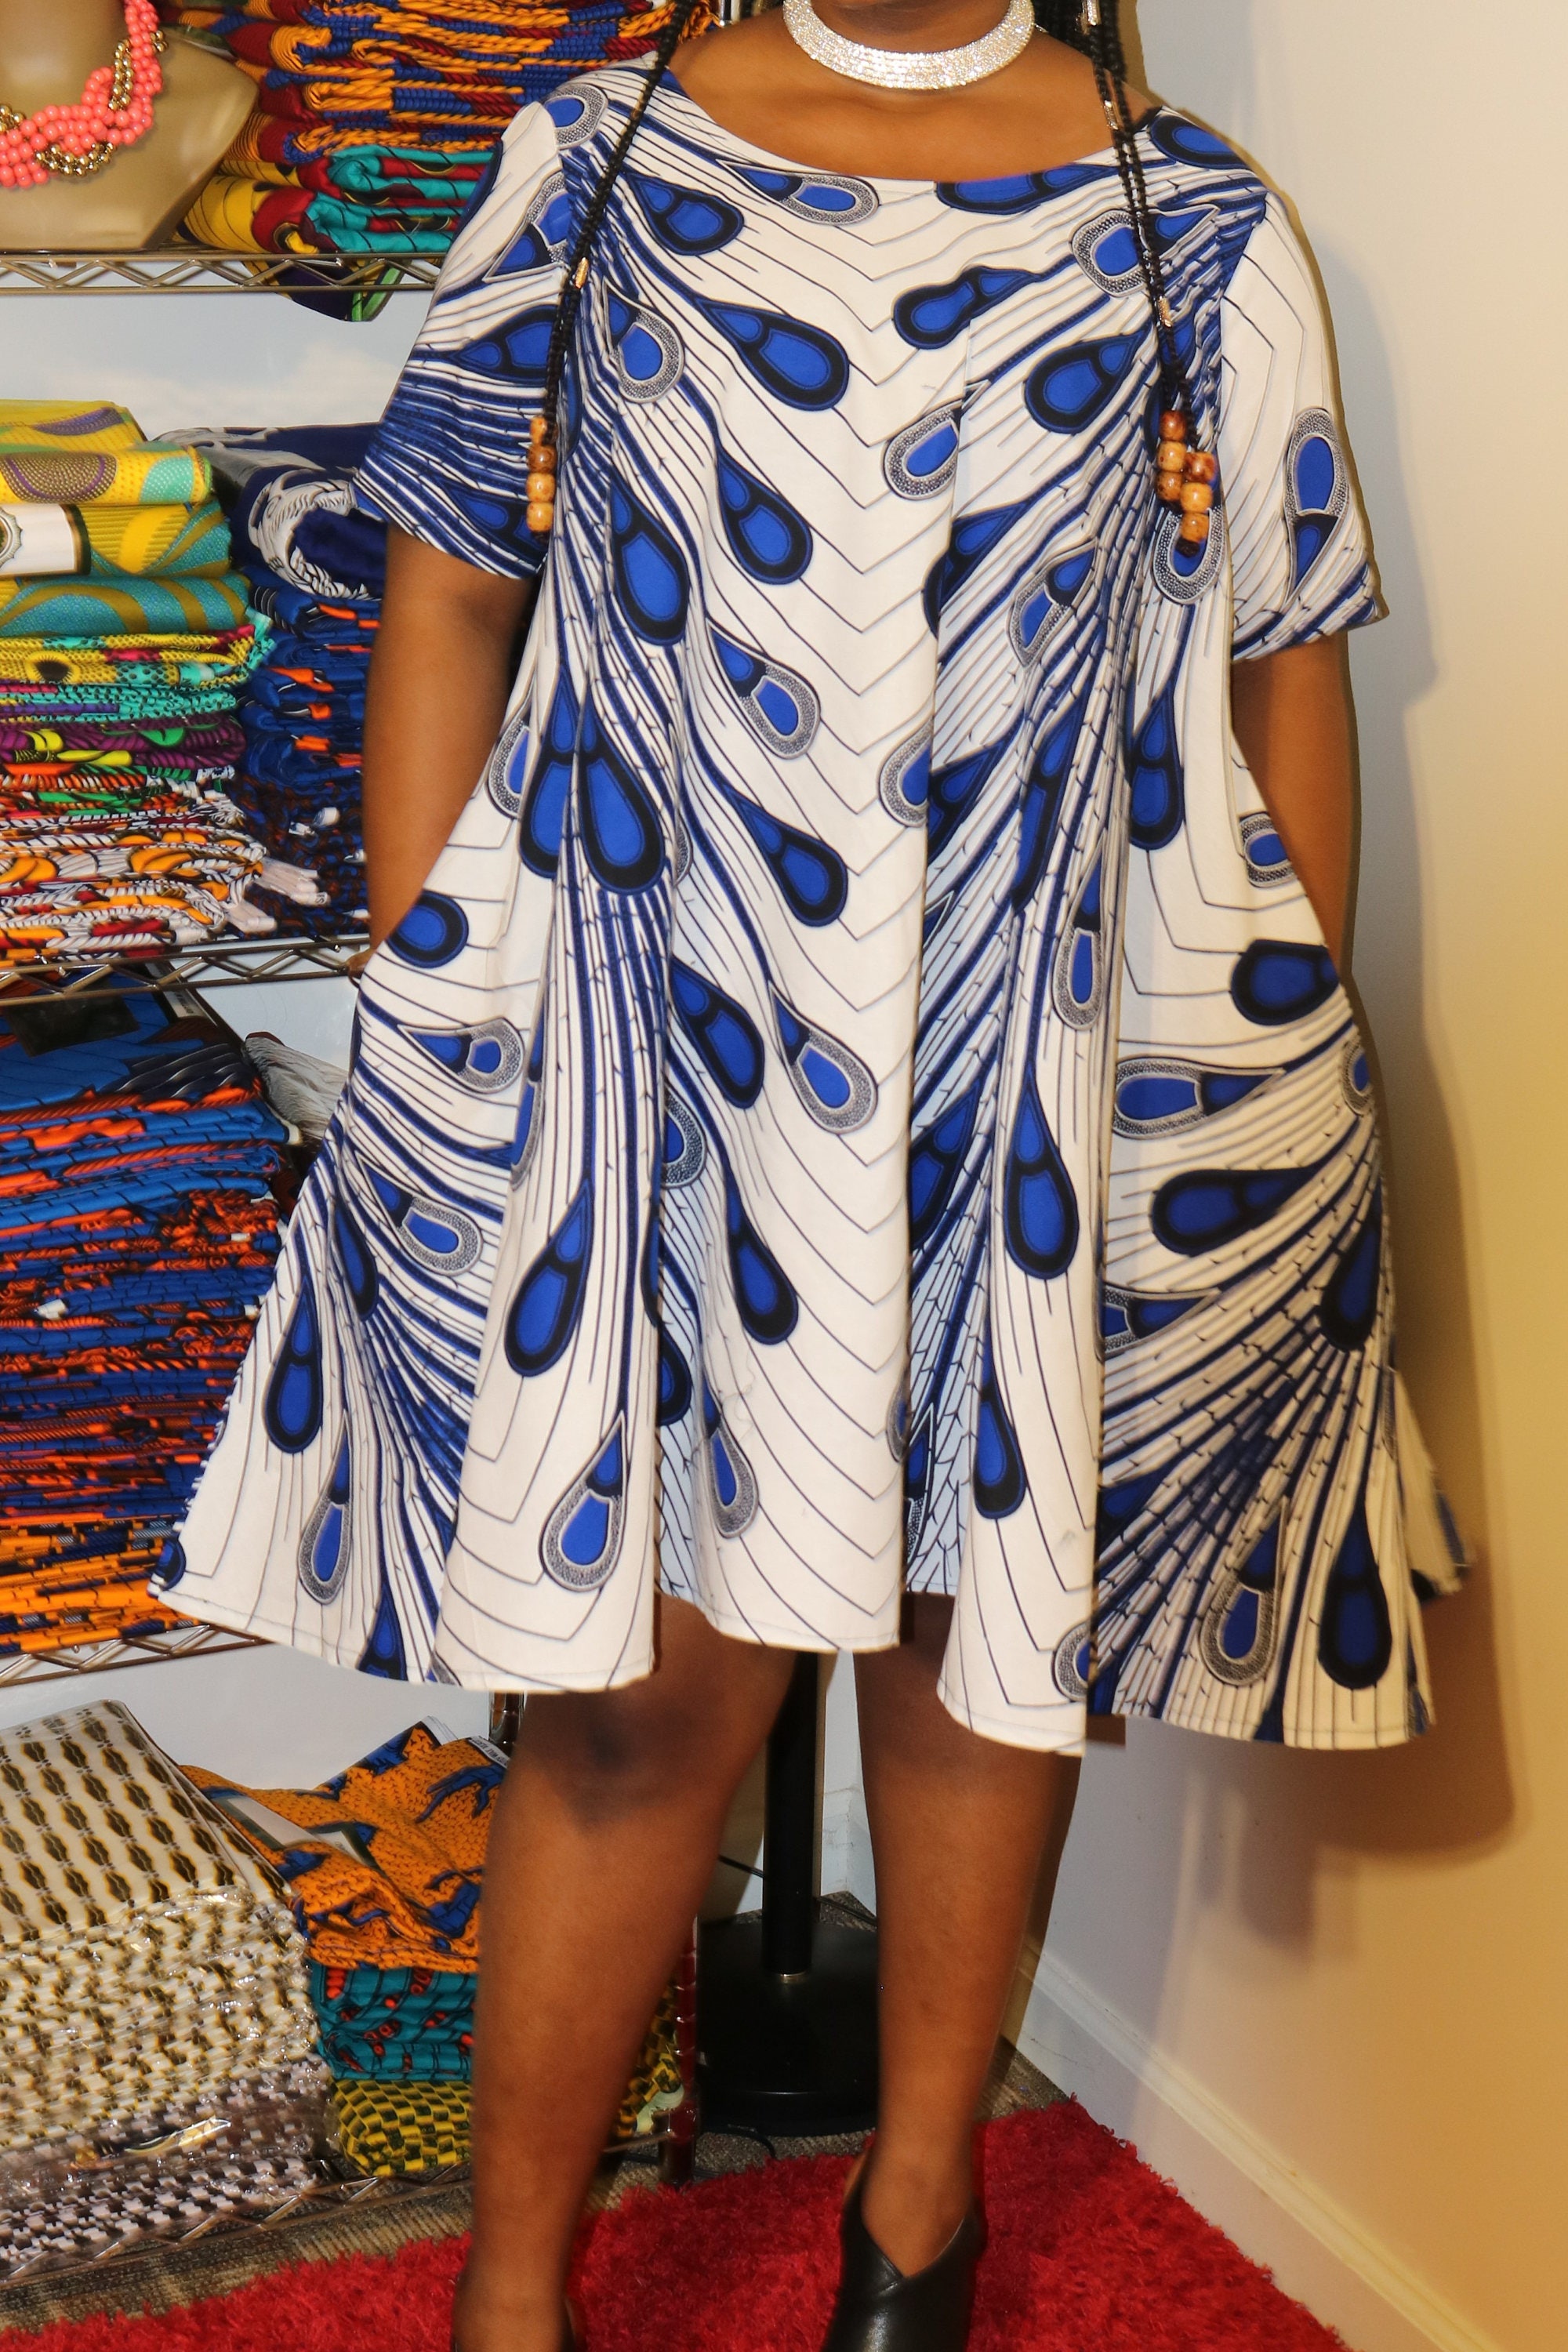 Quality african print dresses south africa and